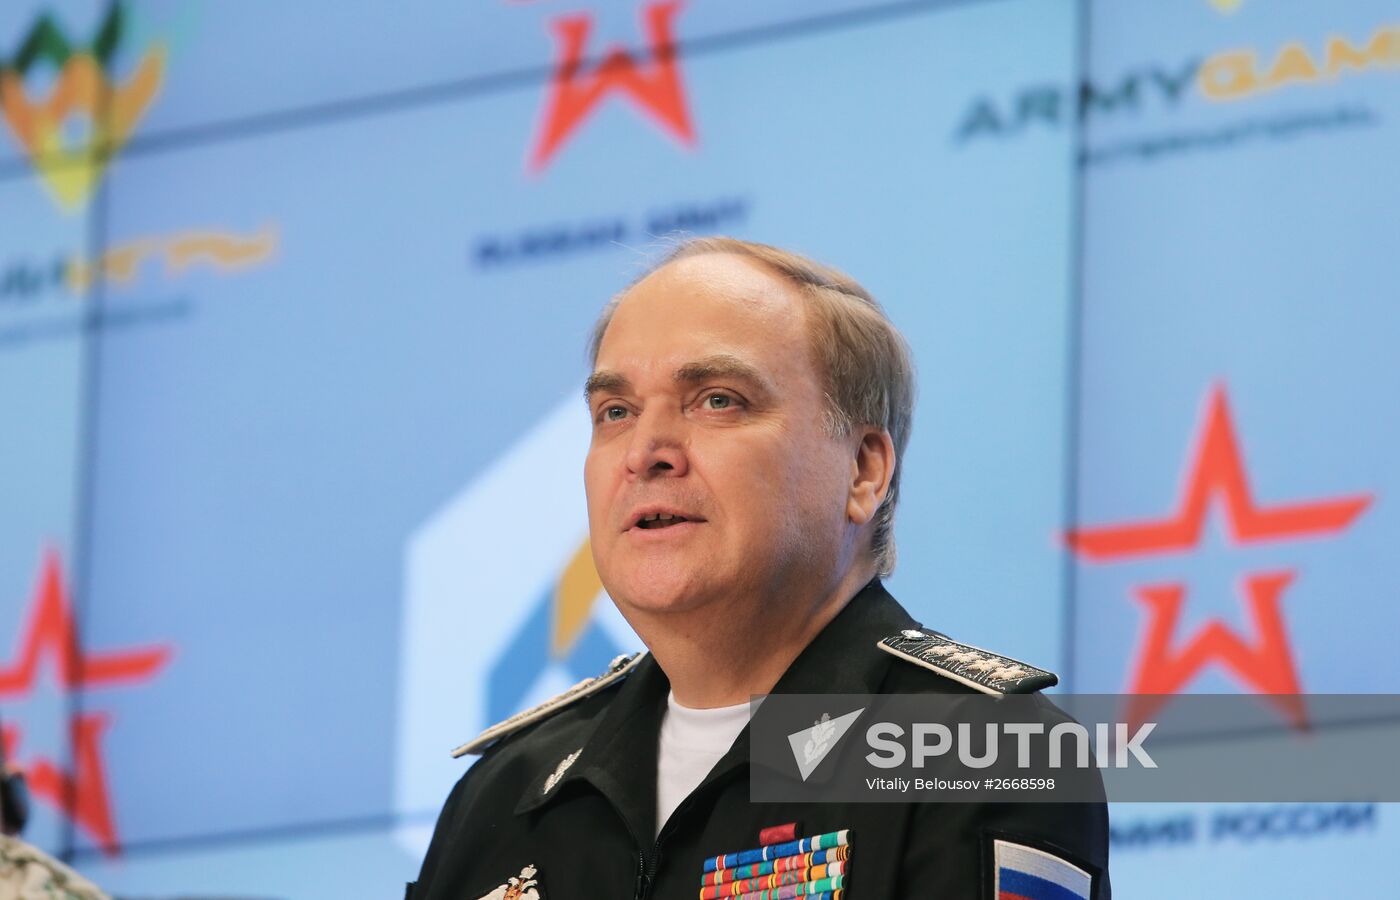 News conference by Russian Deputy Defense Minister Anatoly Antonov